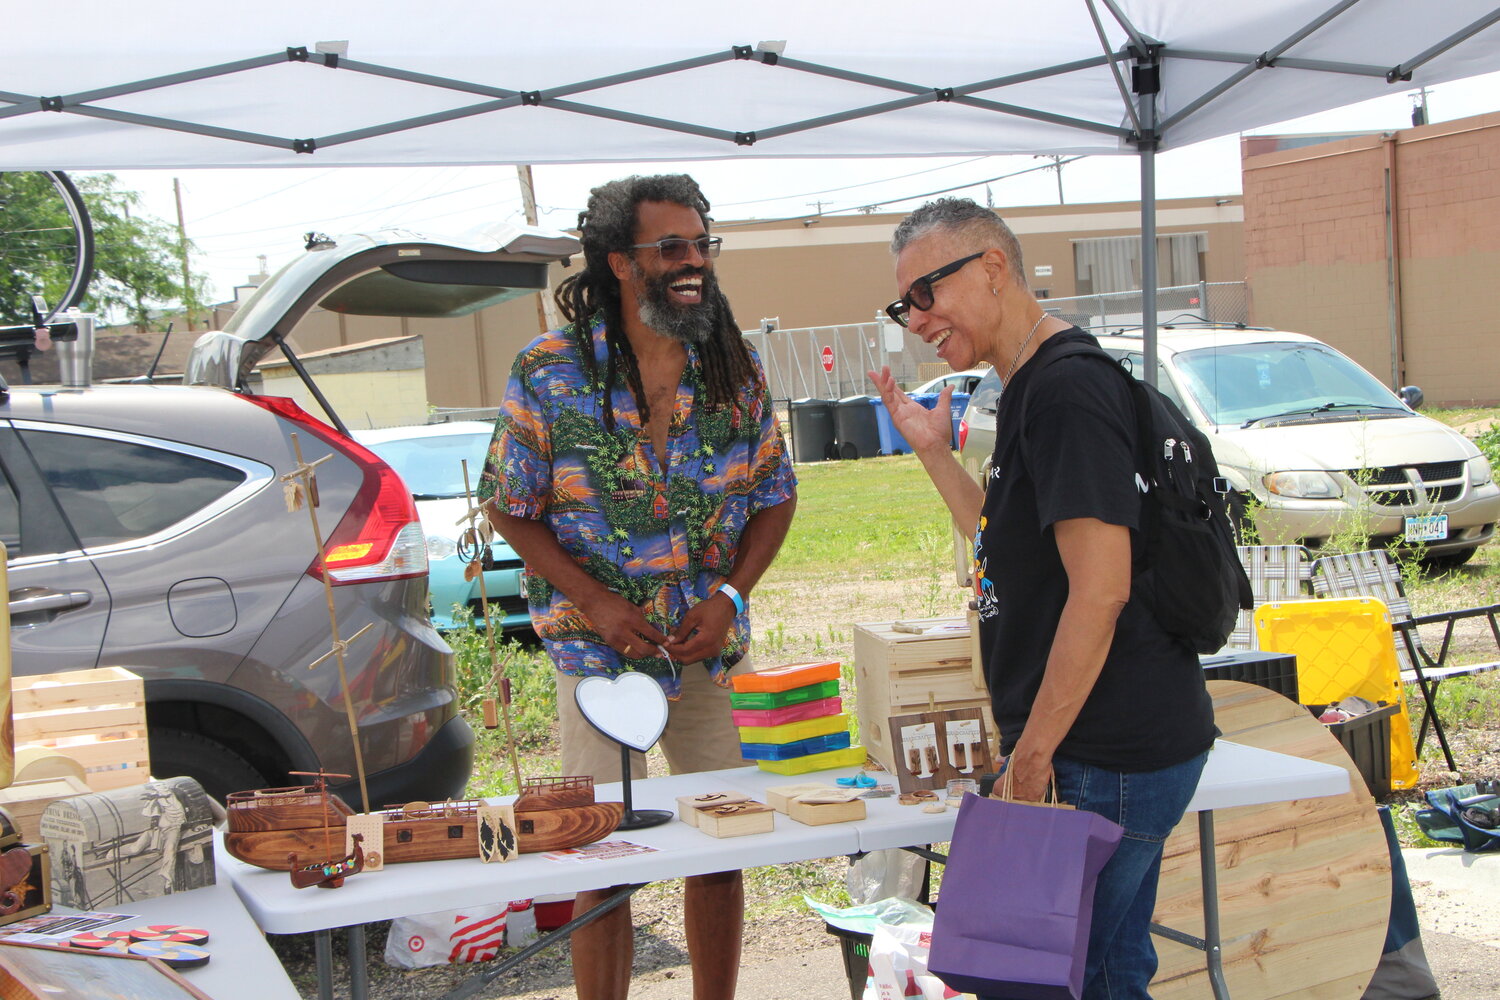 A vendor sells handcrafted wooden art and jewelry at the Soul of the Southside festival on Monday, June 19.